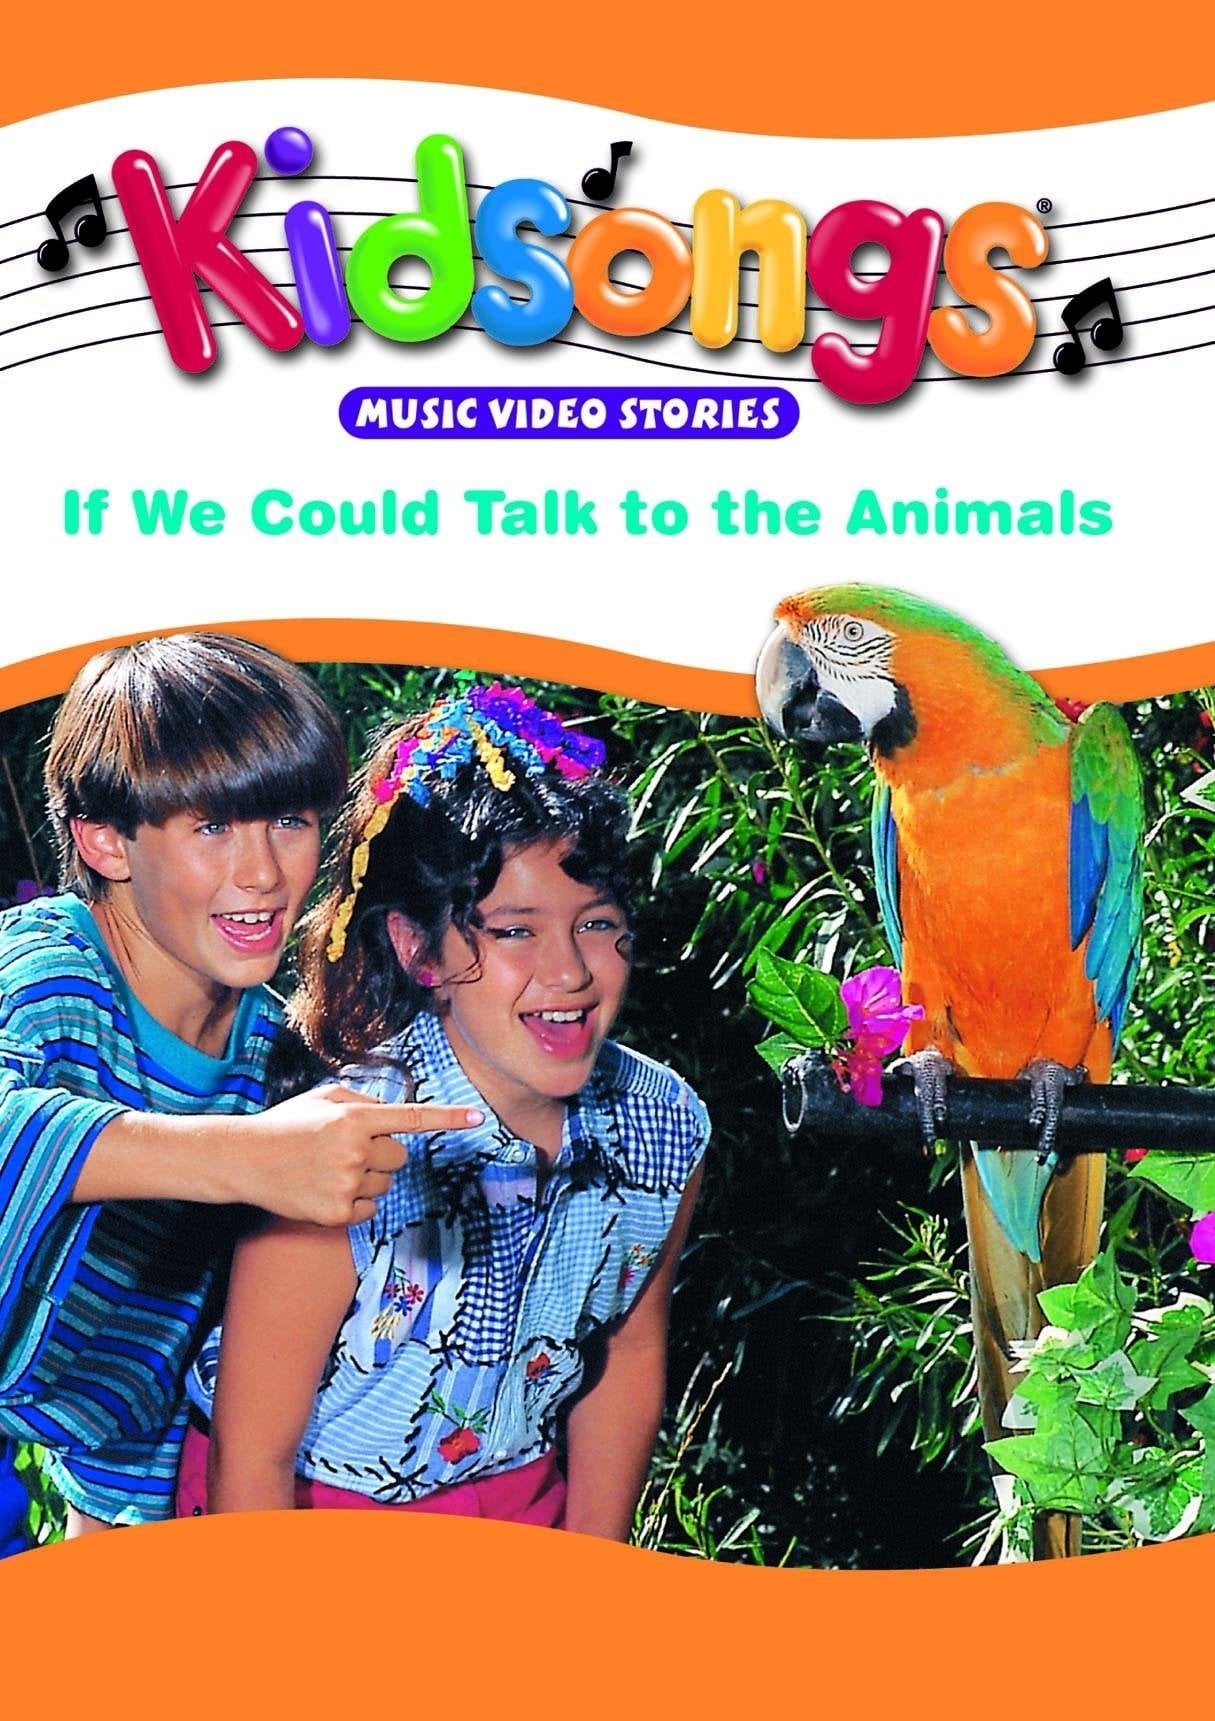 Kidsongs: If We Could Talk To The Animals